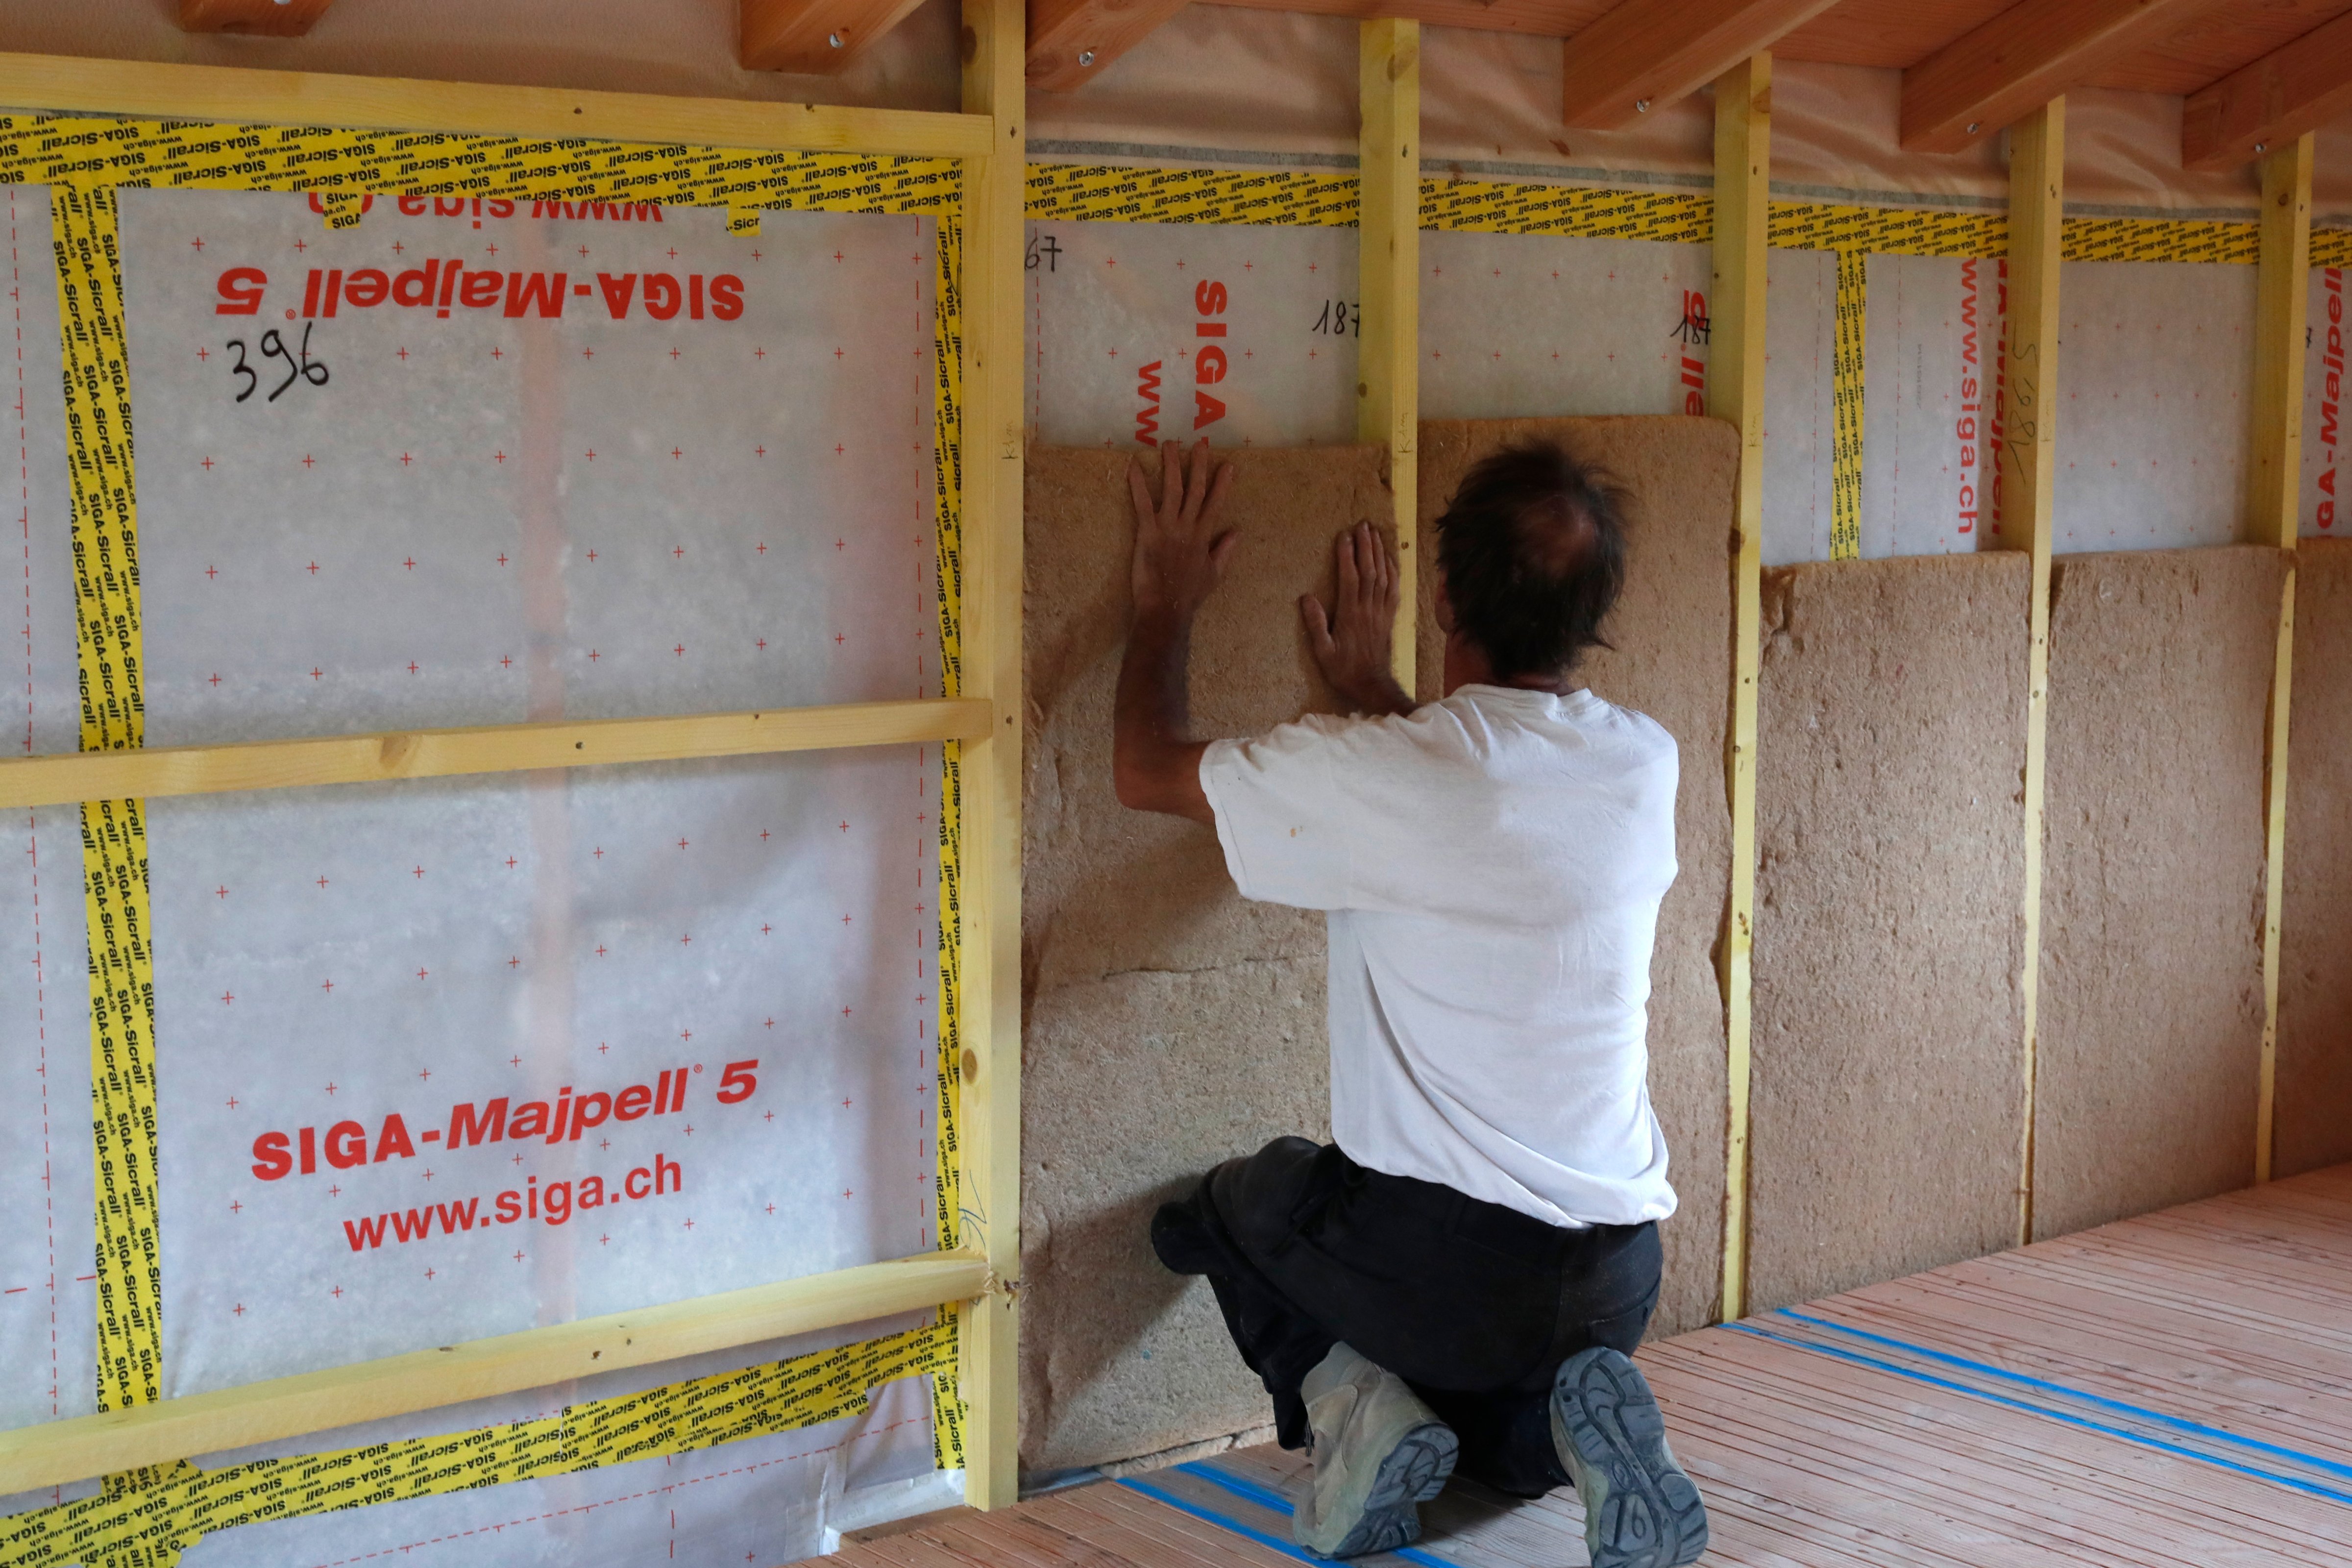 A construction worker installs insulation in a home. (Universal Images Group via Getty Images)